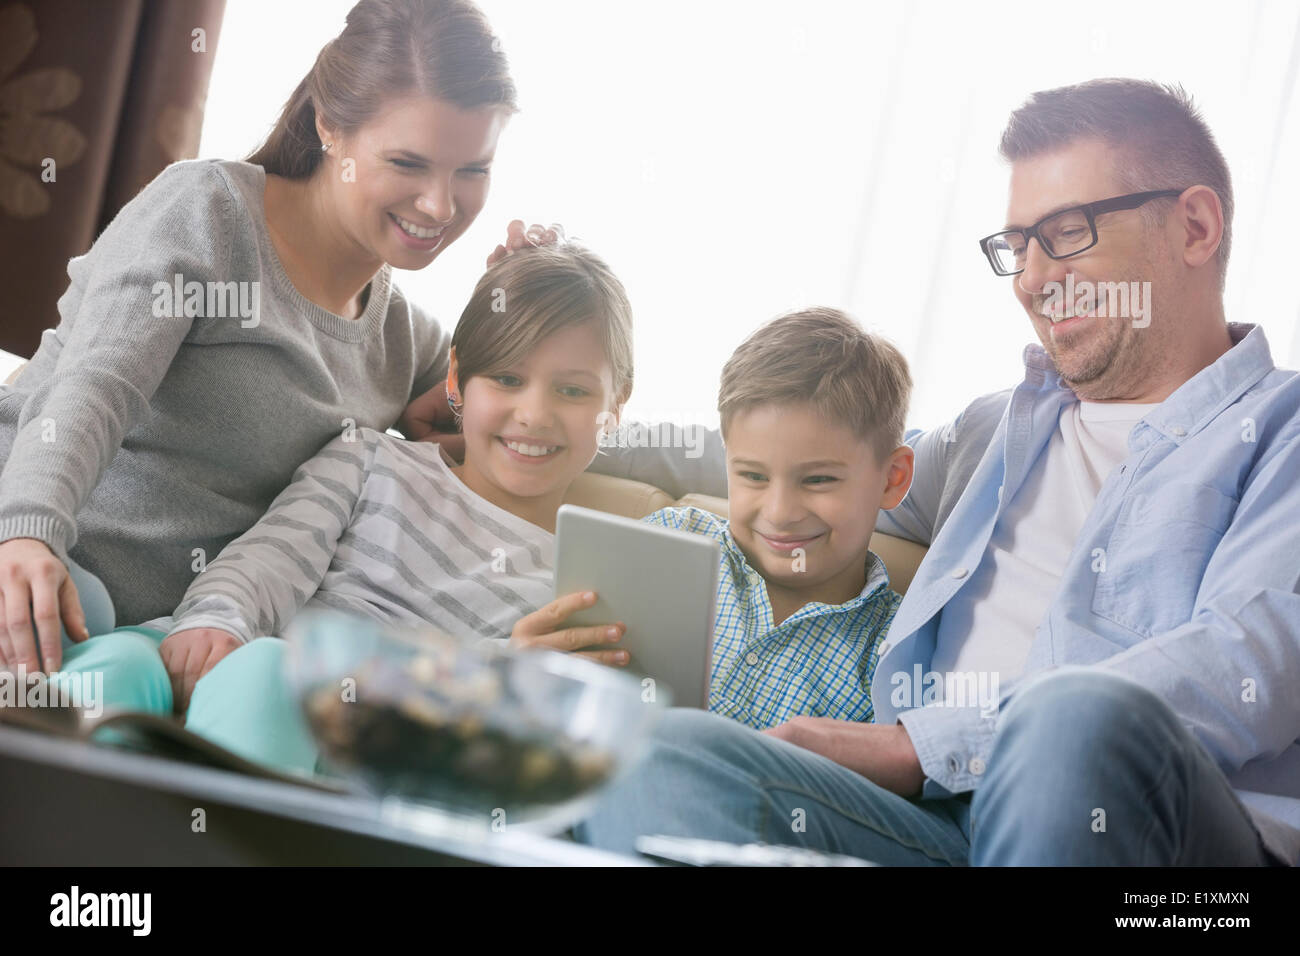 Happy Family using digital tablet together in living room Banque D'Images